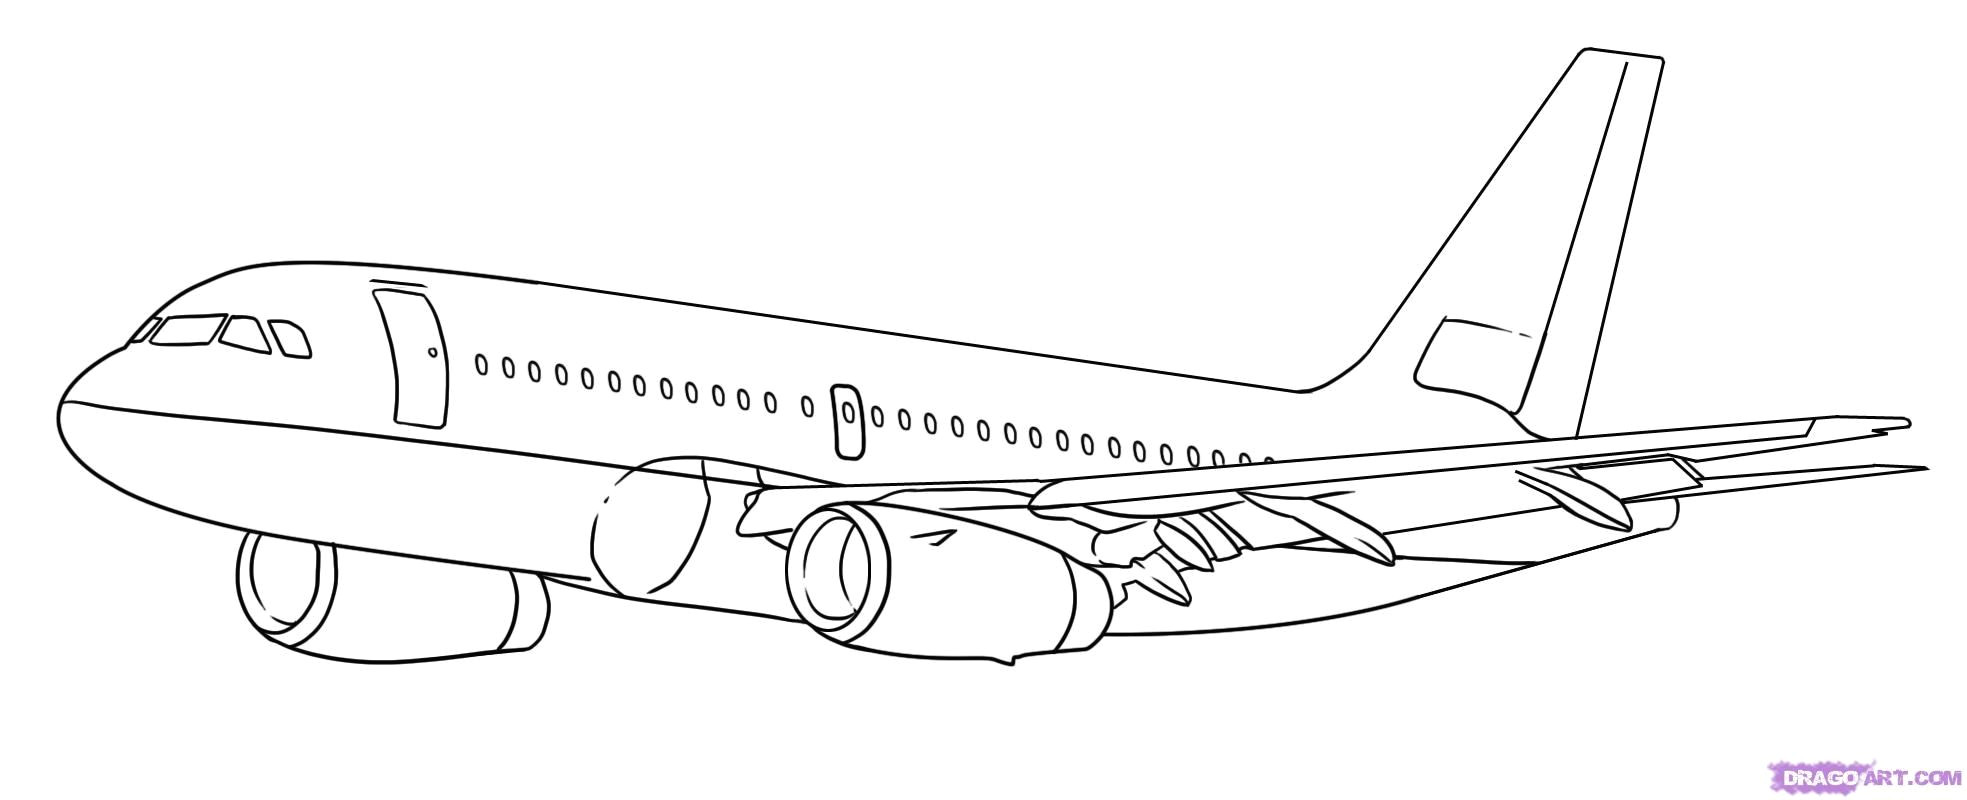 airplane drawing google search airplane sketch airplane drawing outline drawings cartoon drawings